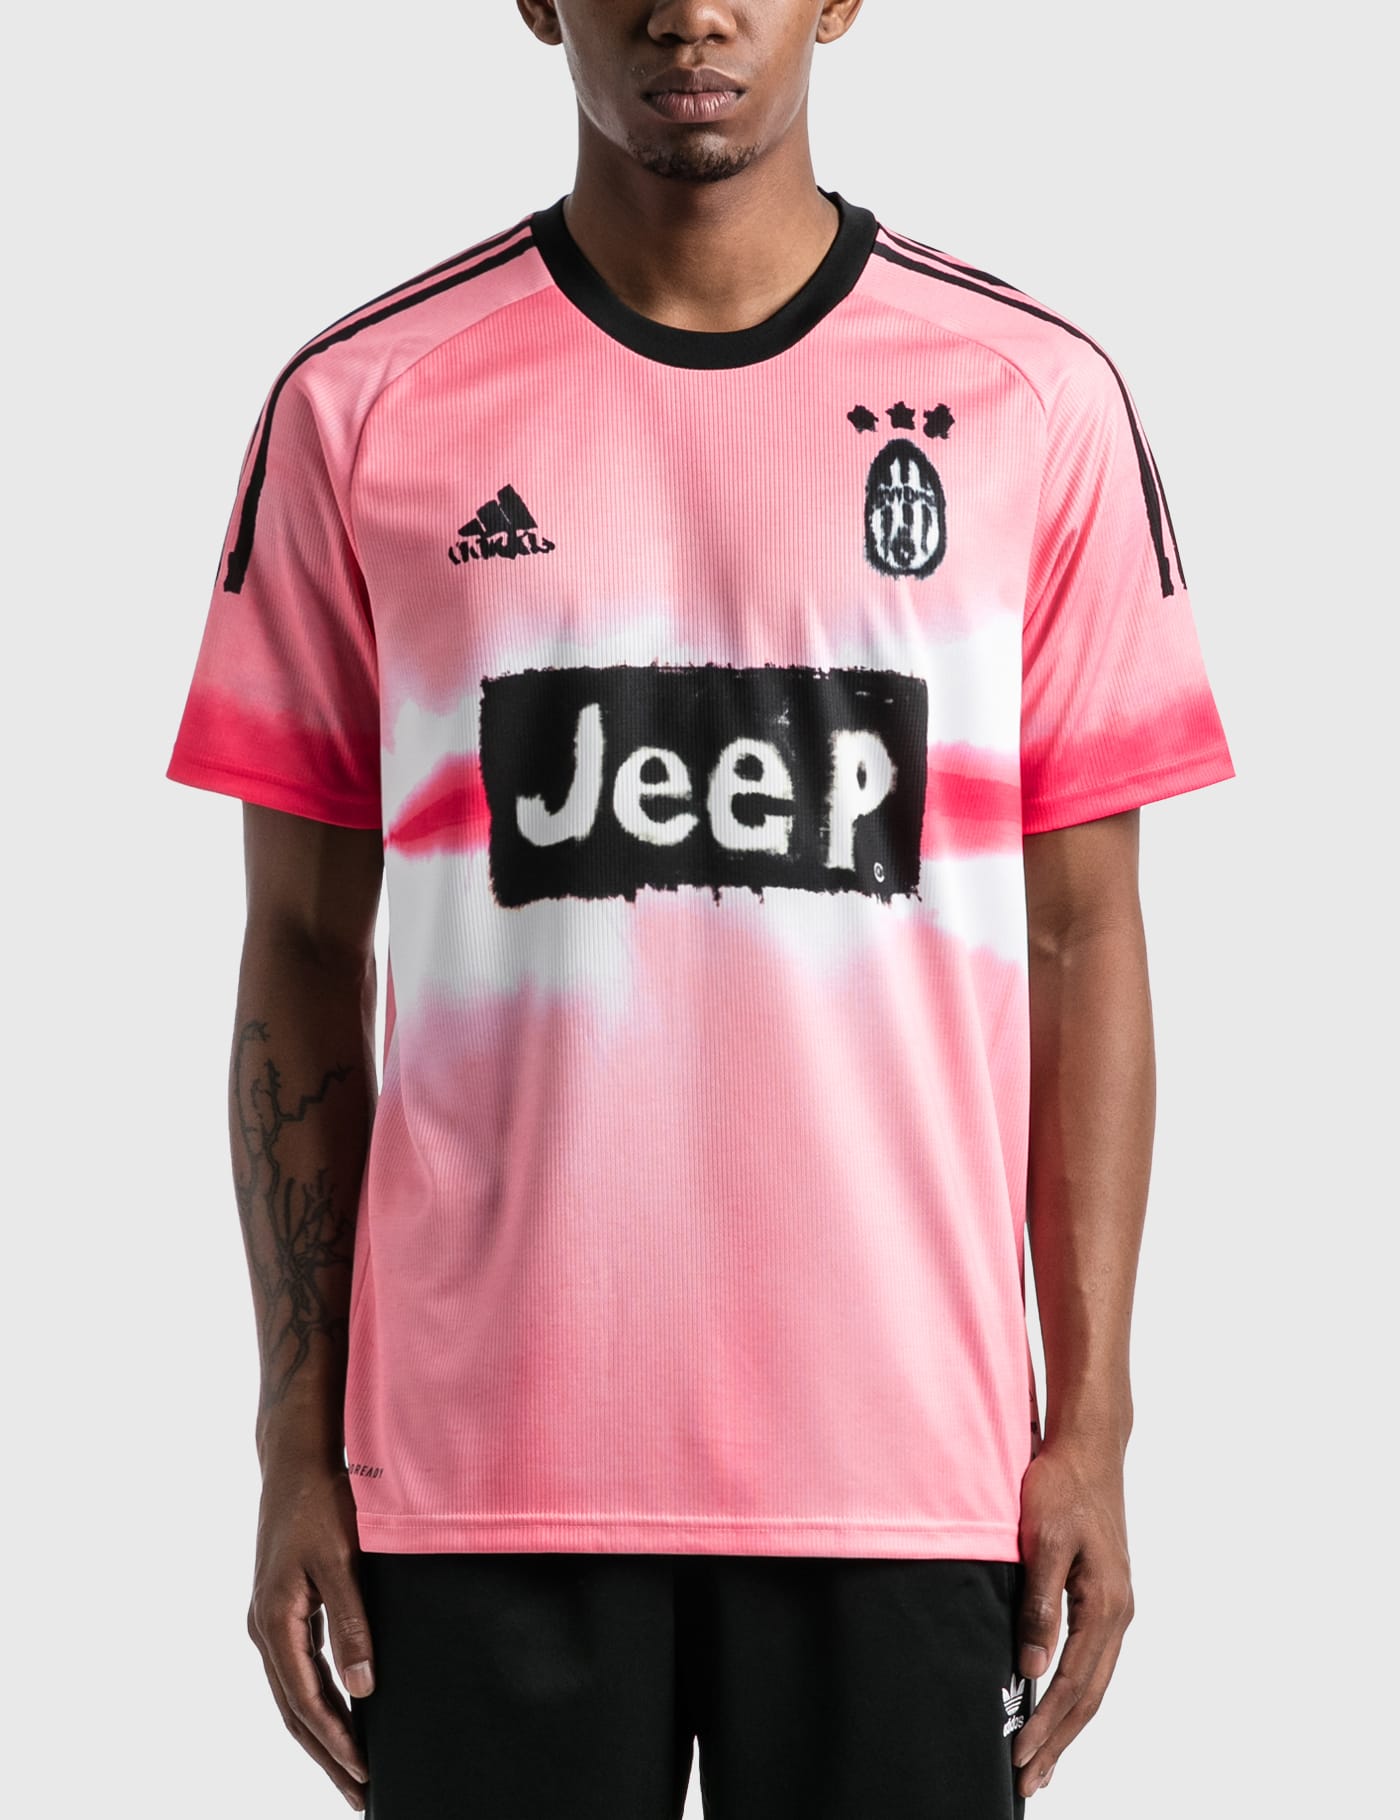 Adidas Originals - Adidas x Pharrell Williams Juventus Human Race Jersey |  HBX - Globally Curated Fashion and Lifestyle by Hypebeast